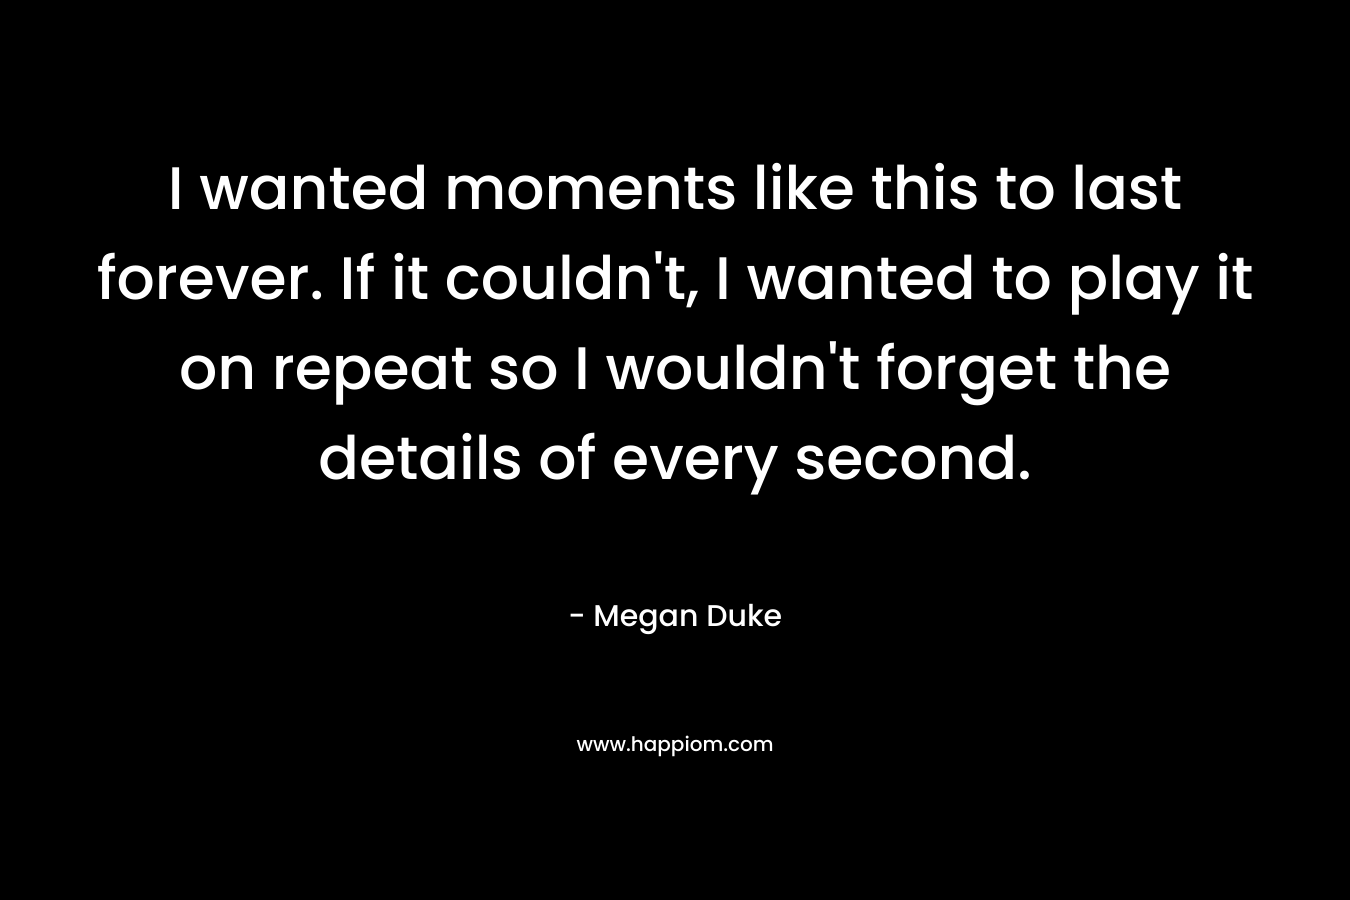 I wanted moments like this to last forever. If it couldn’t, I wanted to play it on repeat so I wouldn’t forget the details of every second. – Megan Duke